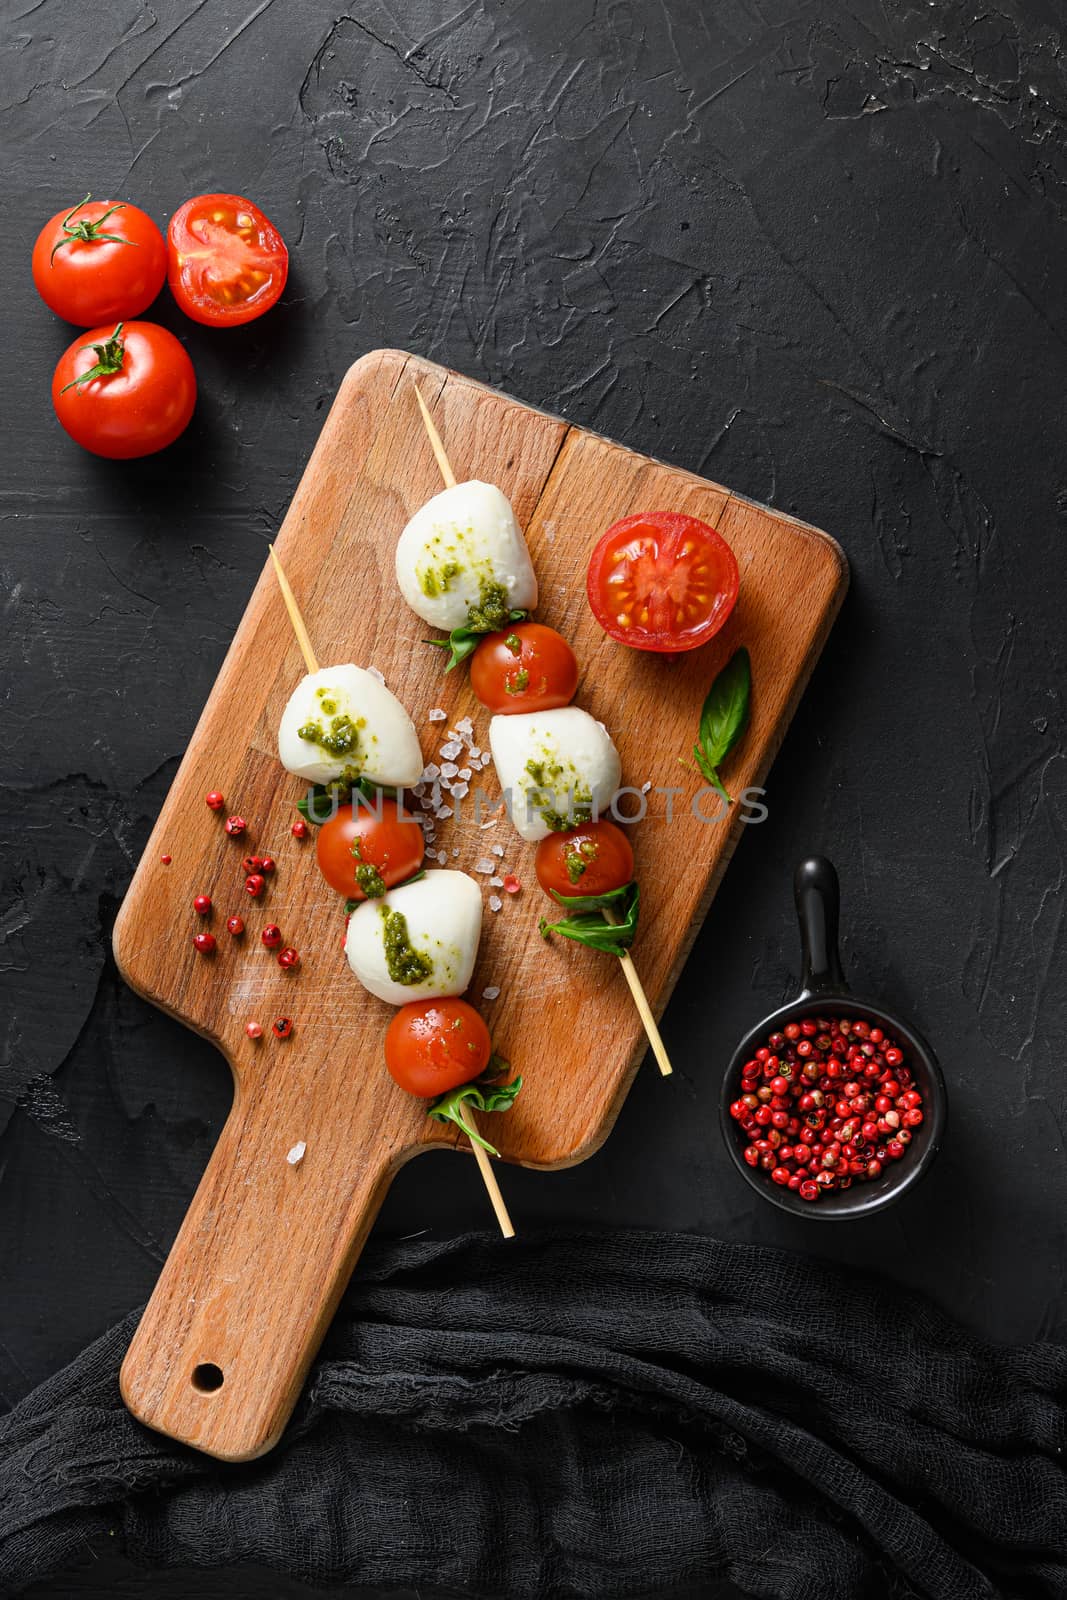 caprese salad skewer with tomato on sticks Italian traditional caprese salad ingredients. Mediterranean food. over black stone background overhead space for text vertical by Ilianesolenyi